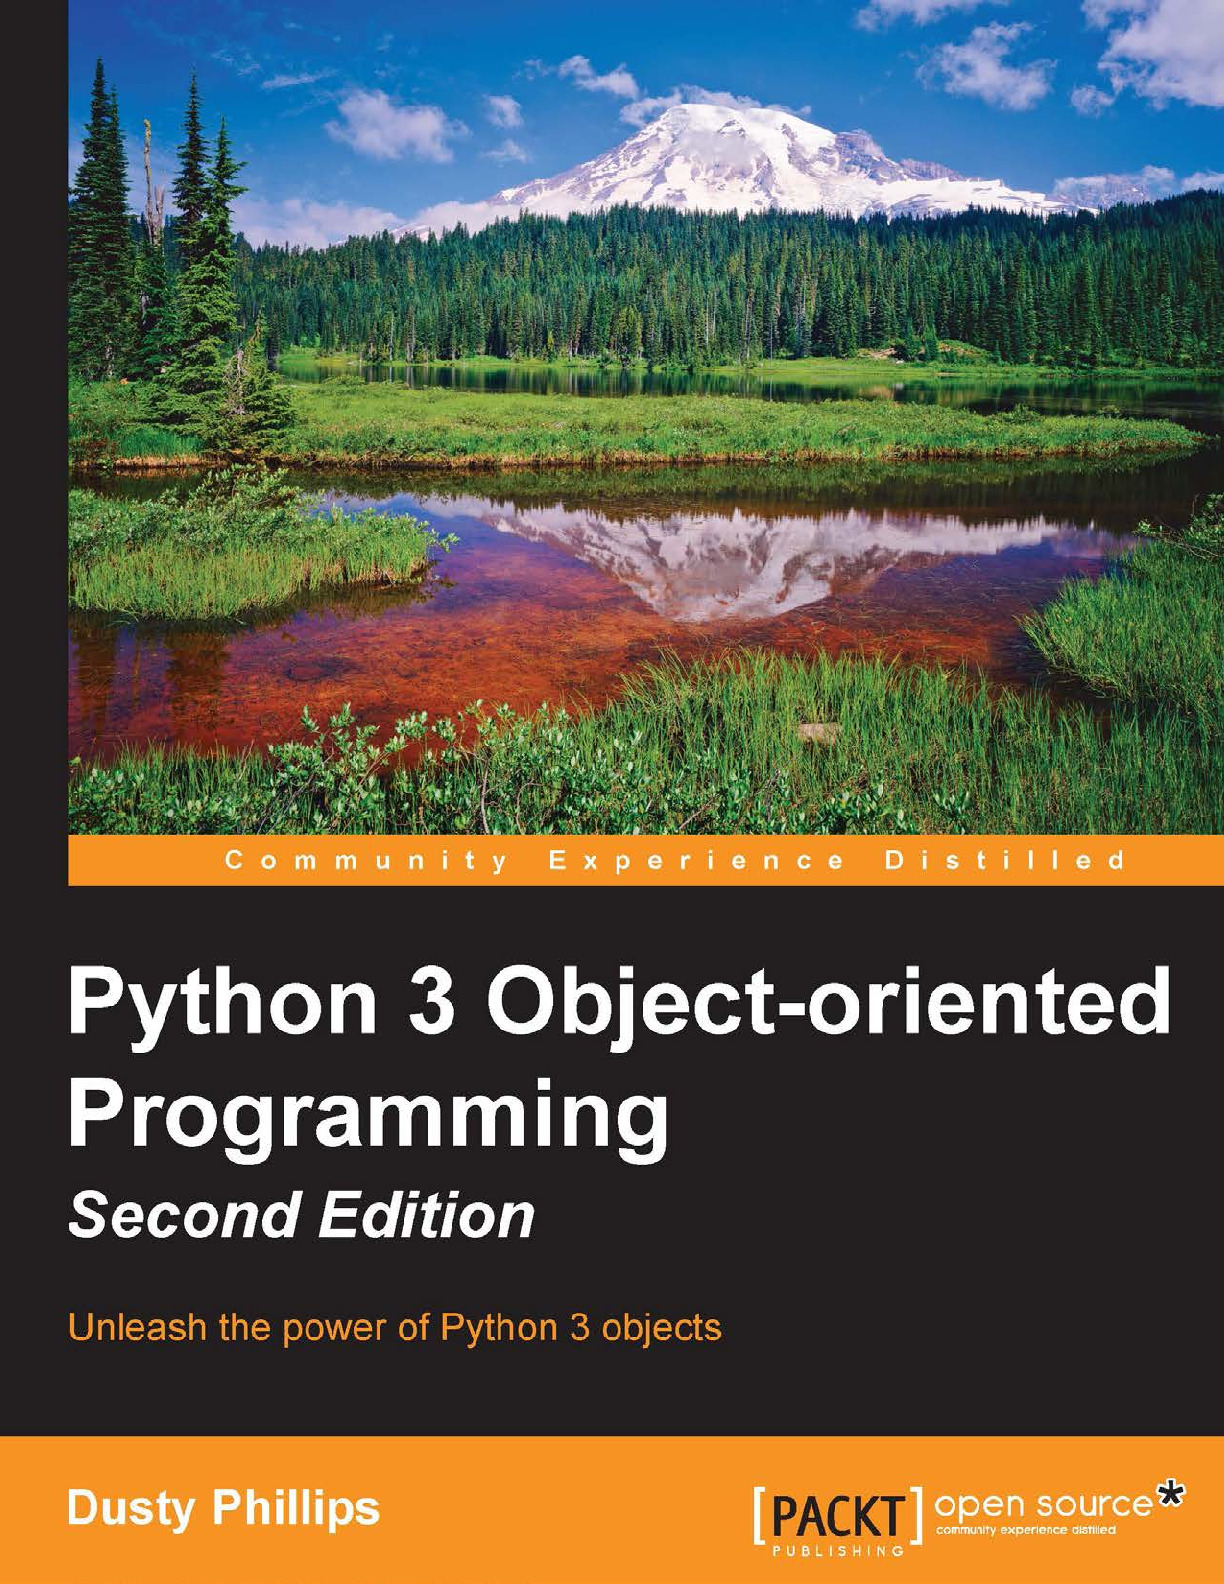 Python 3 Object-oriented Programming – Second Edition